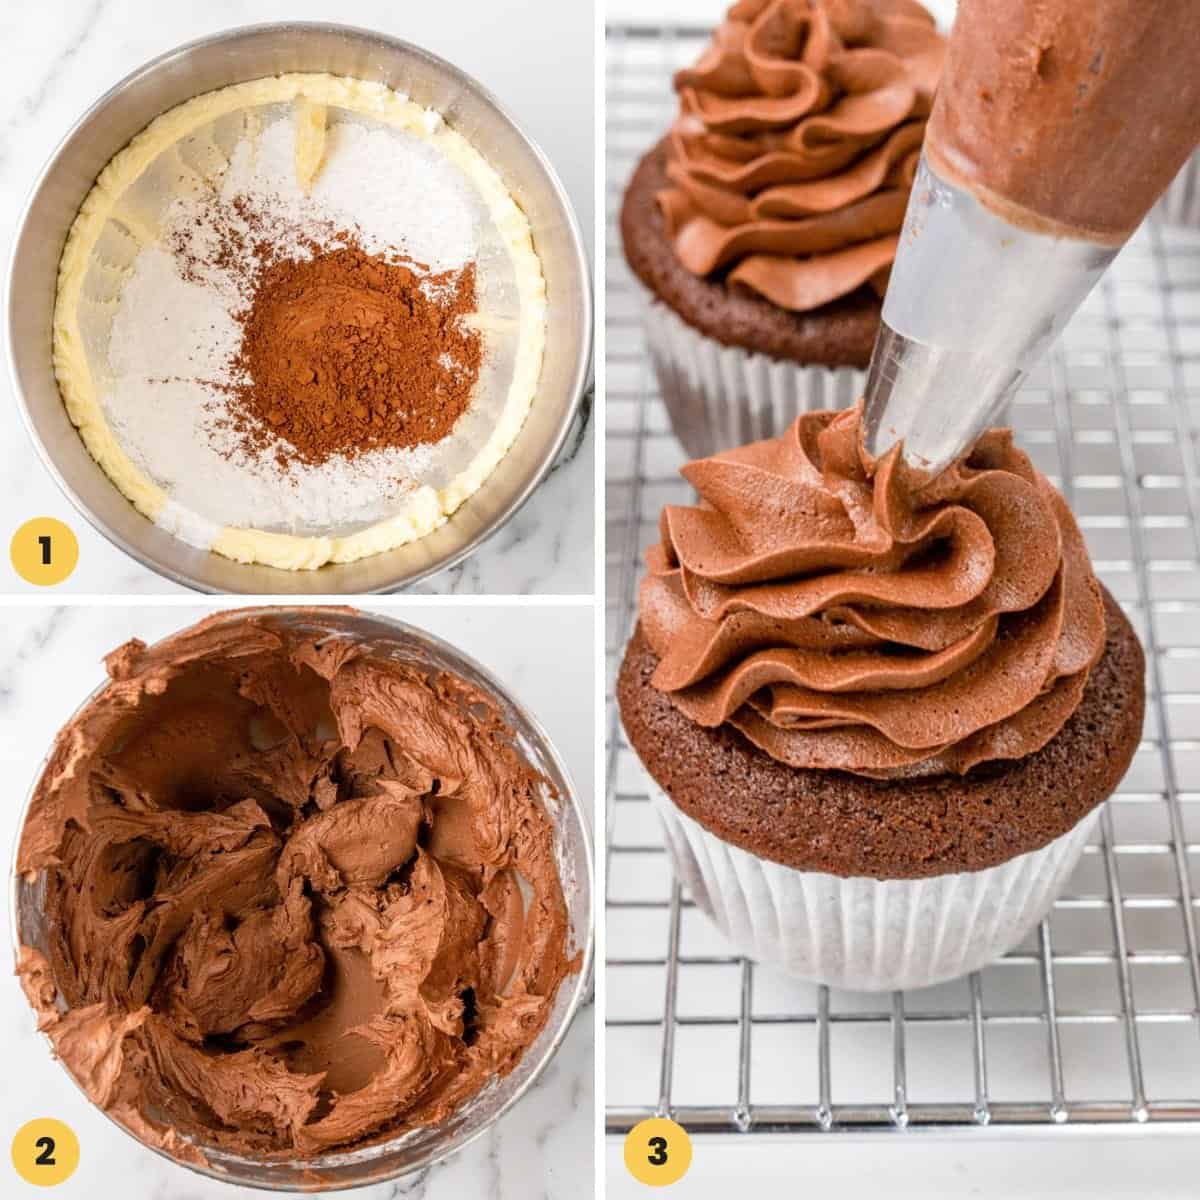 Collage of 3 images showing how to make chocolate frosting and frost cupcakes